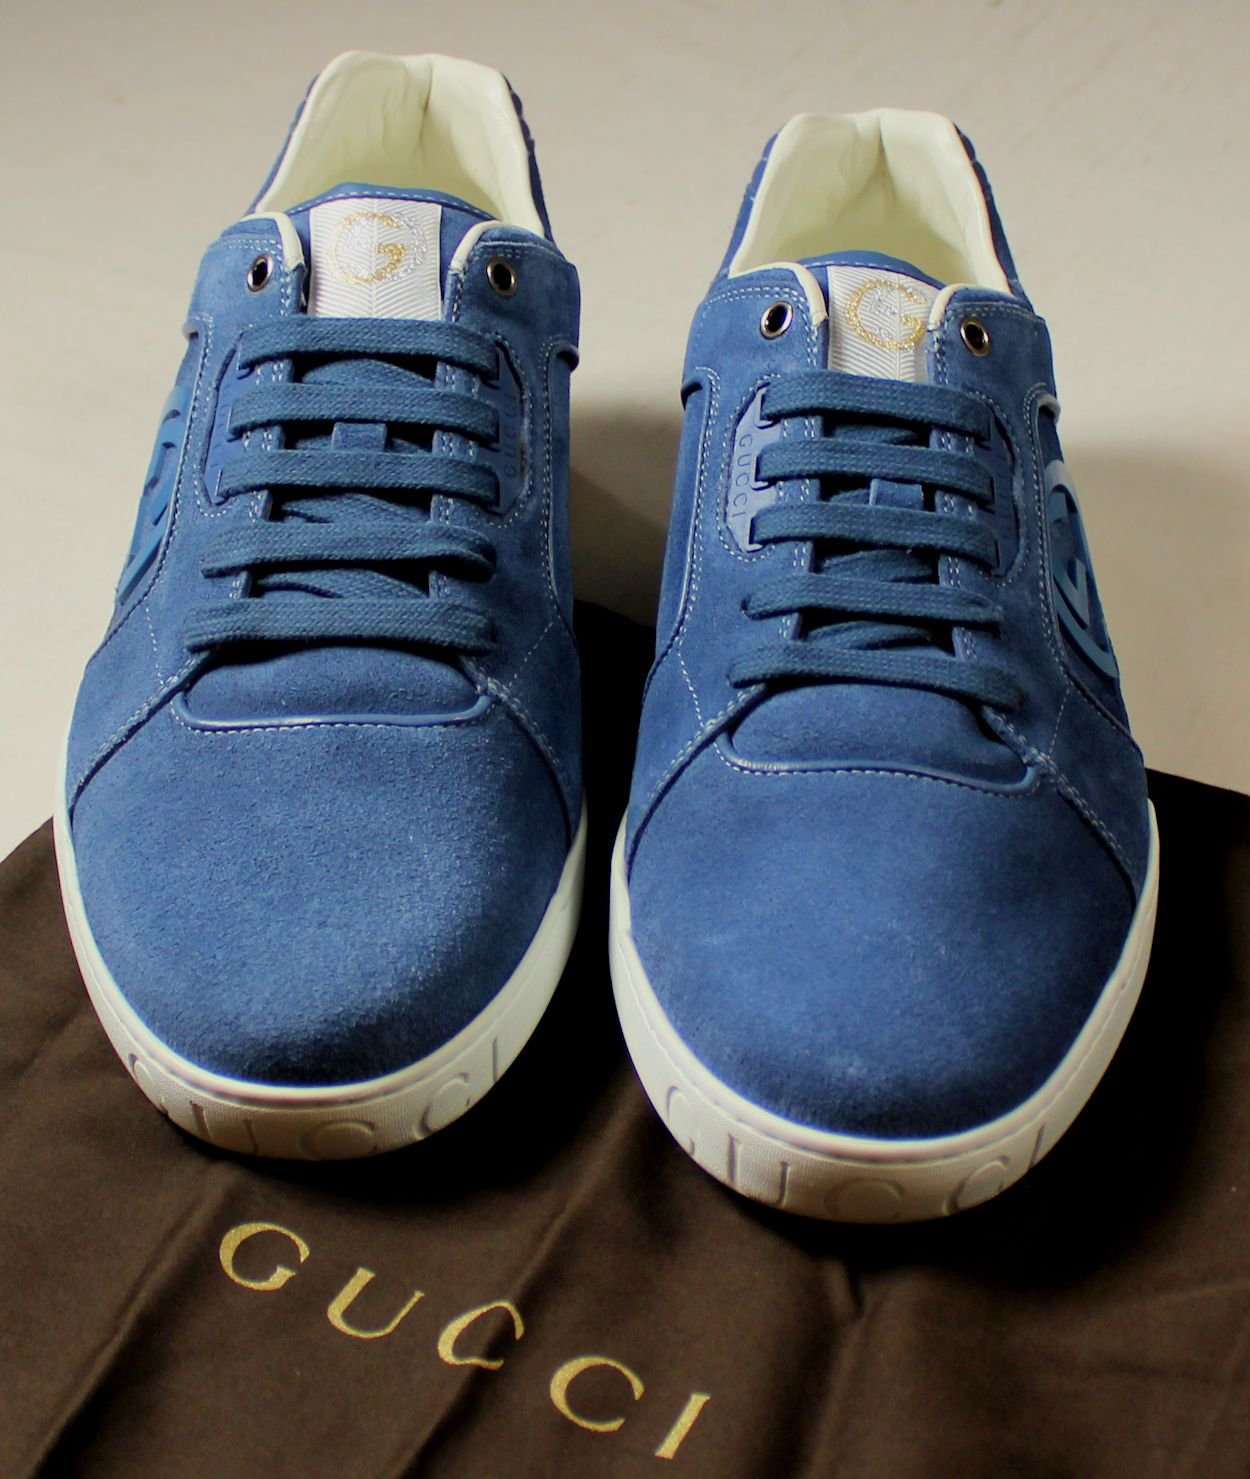 GUCCI SHOES $550 BLUE SUEDE LOGO GG ORNAMENTED LOW PROFILE TRAINERS 11 ...